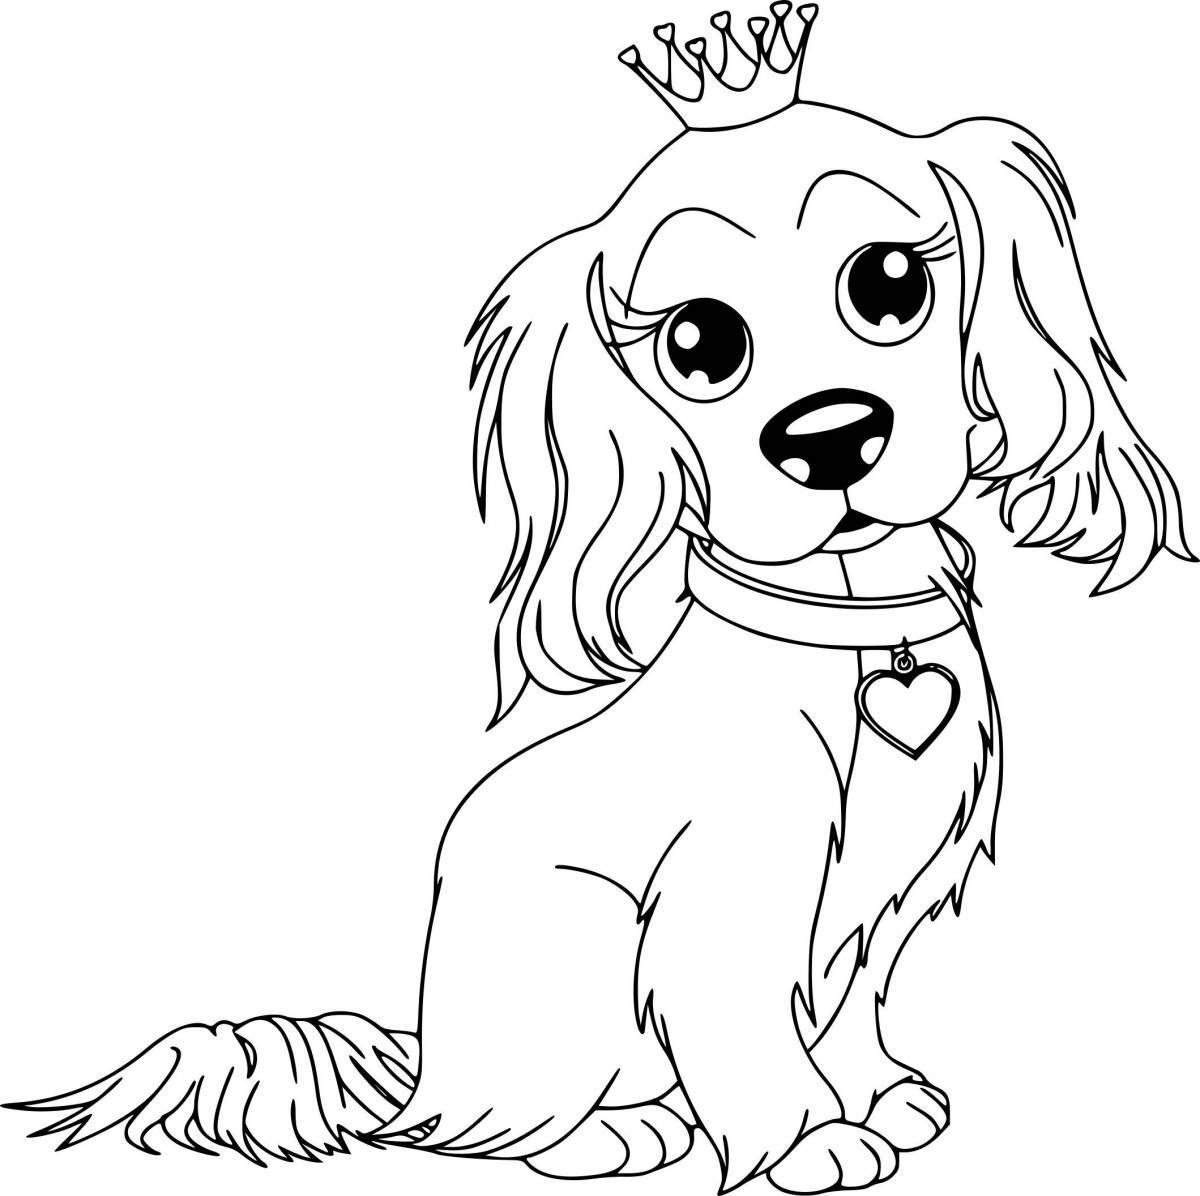 Entertaining dog coloring for children 6-7 years old